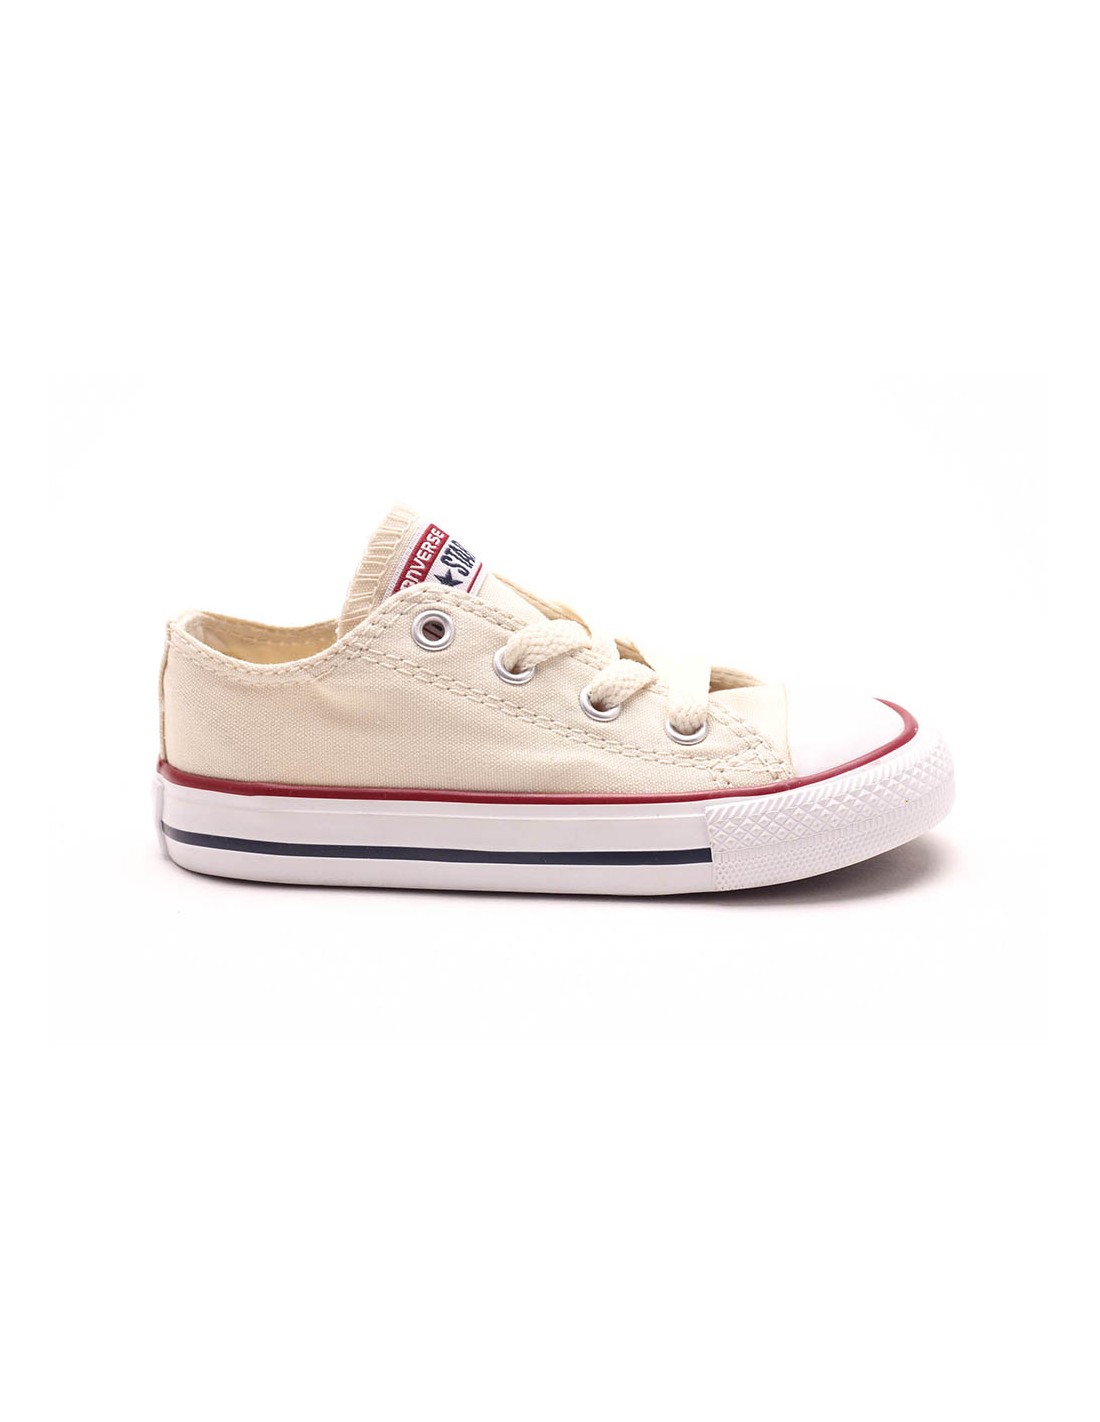 CONVERSE Taylor All Star OX Sneakers